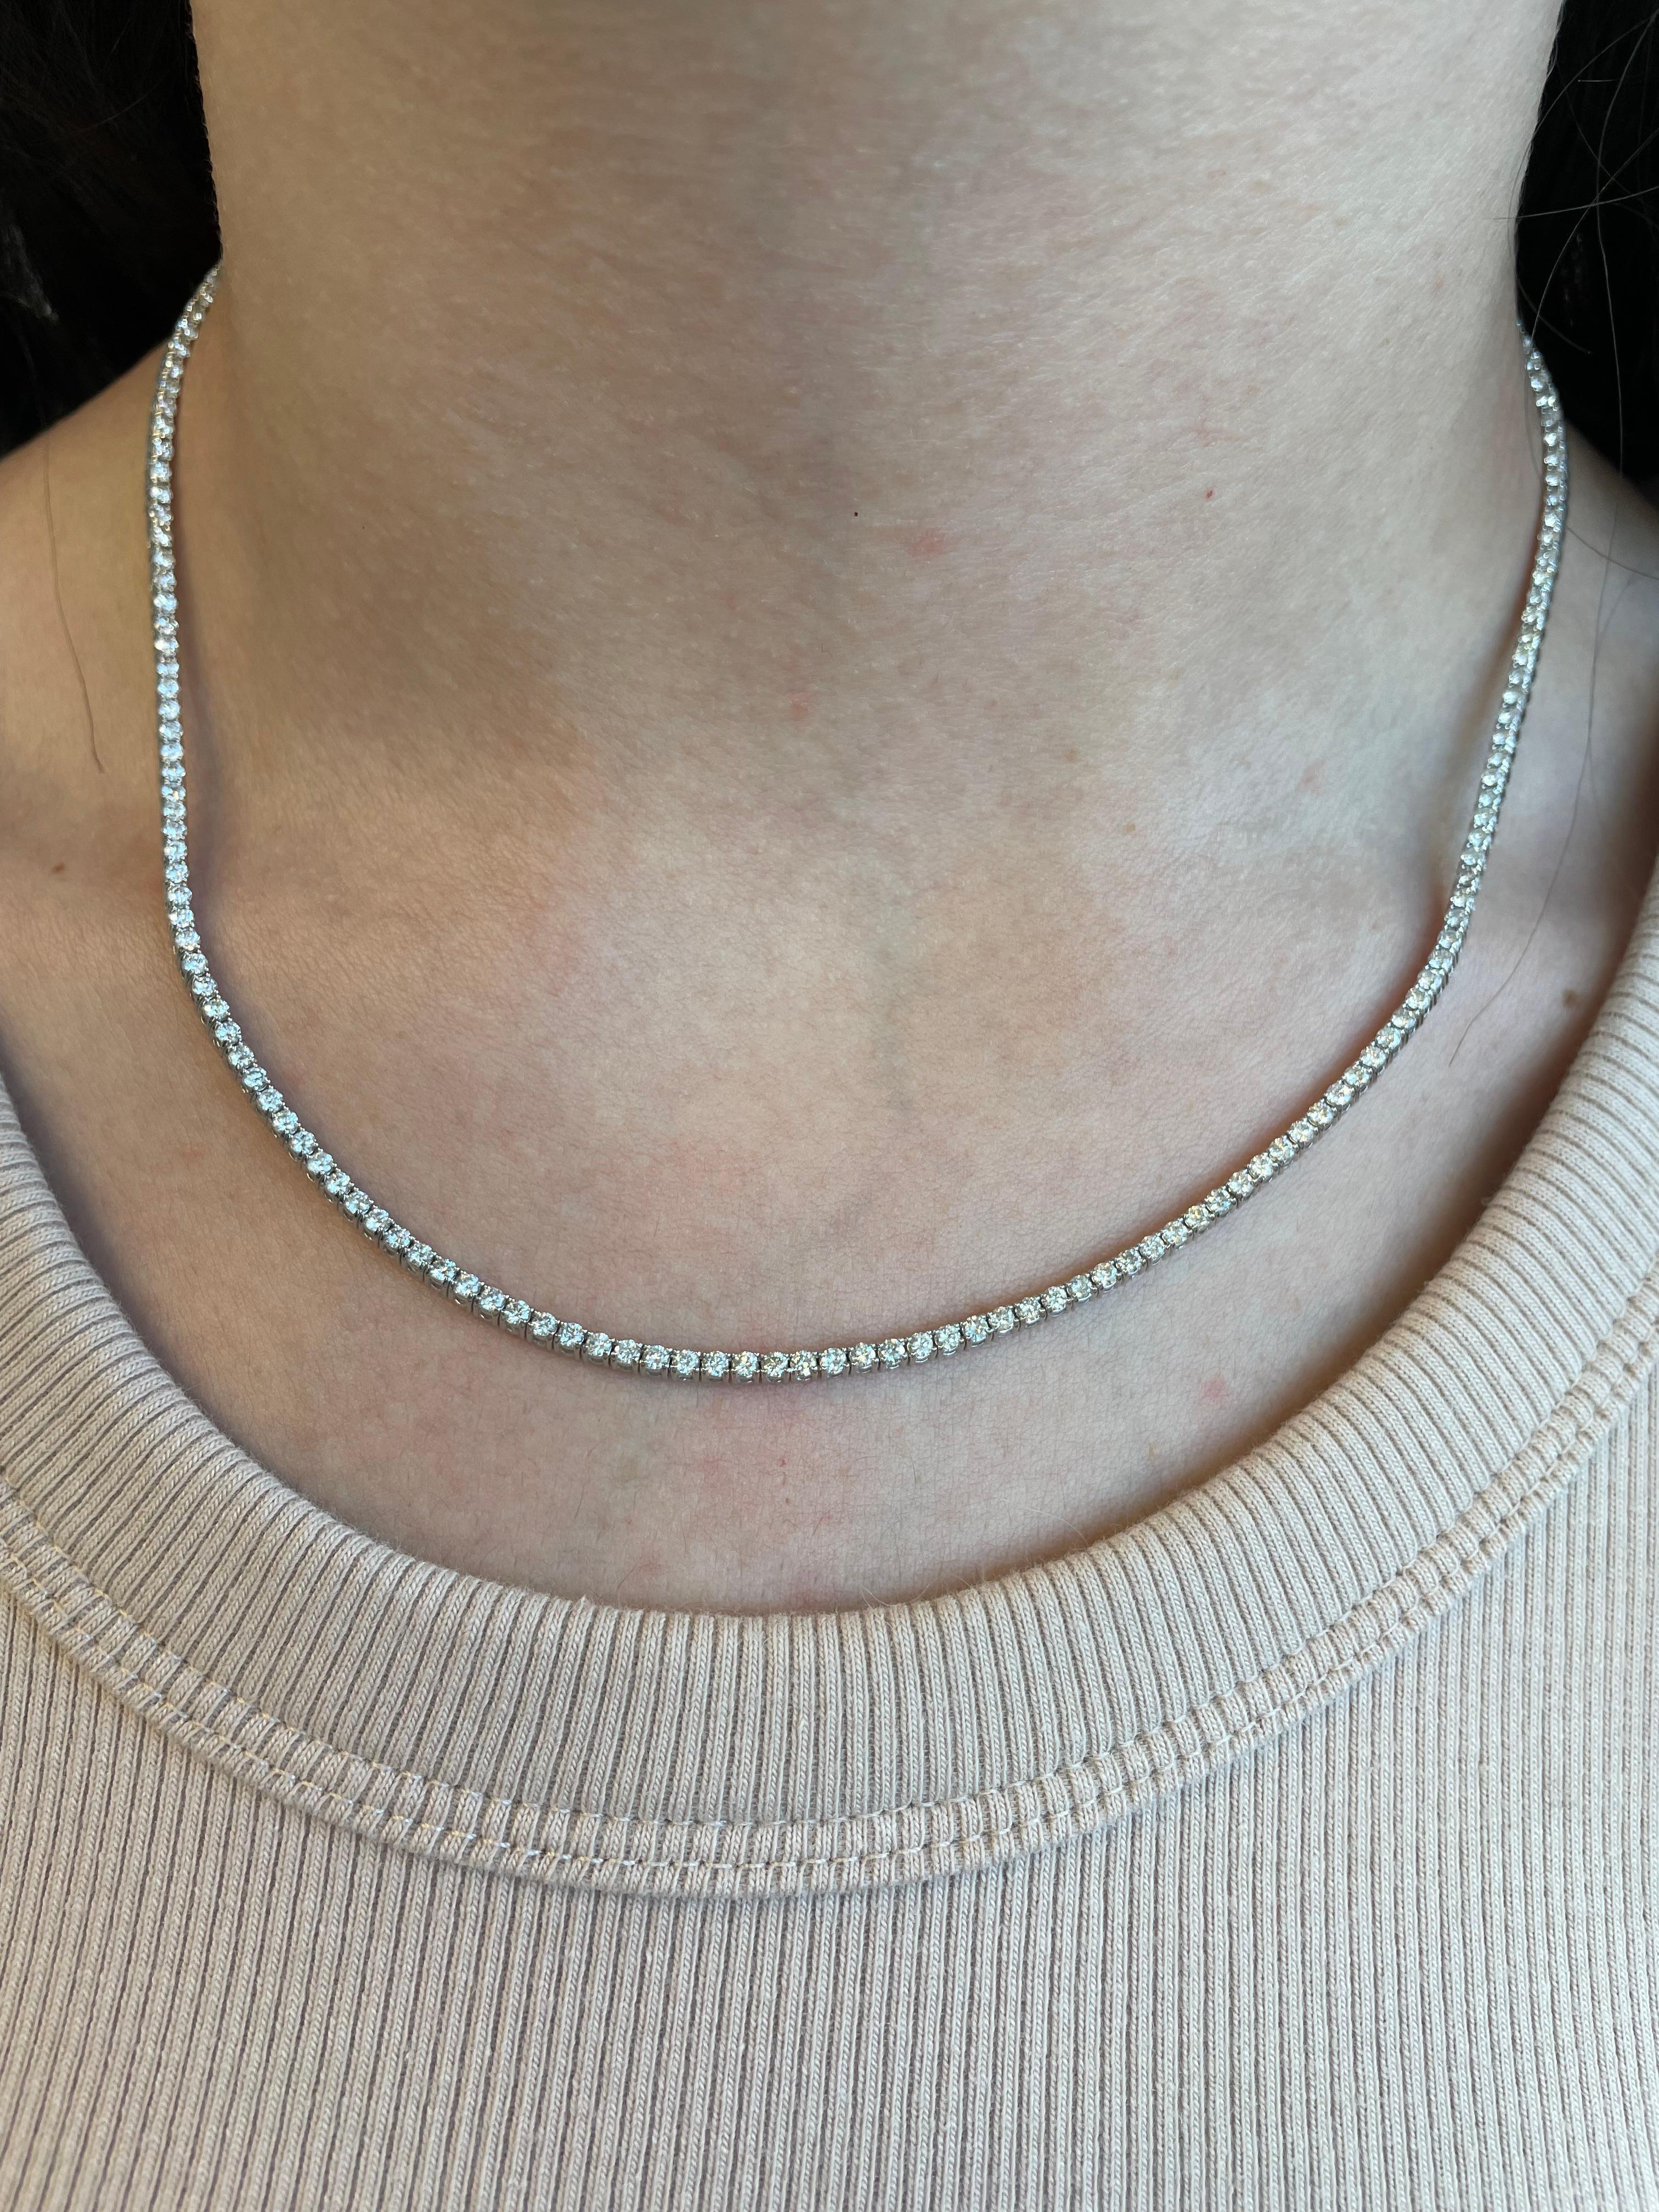 Beautiful and classic diamond tennis necklace. By Alexander Beverly Hills.
6.25 carats of round brilliant diamonds, approximately G/H color and SI clarity. 18k white gold, 19.76 grams, 17in.
Accommodated with an up-to-date appraisal by a GIA G.G.